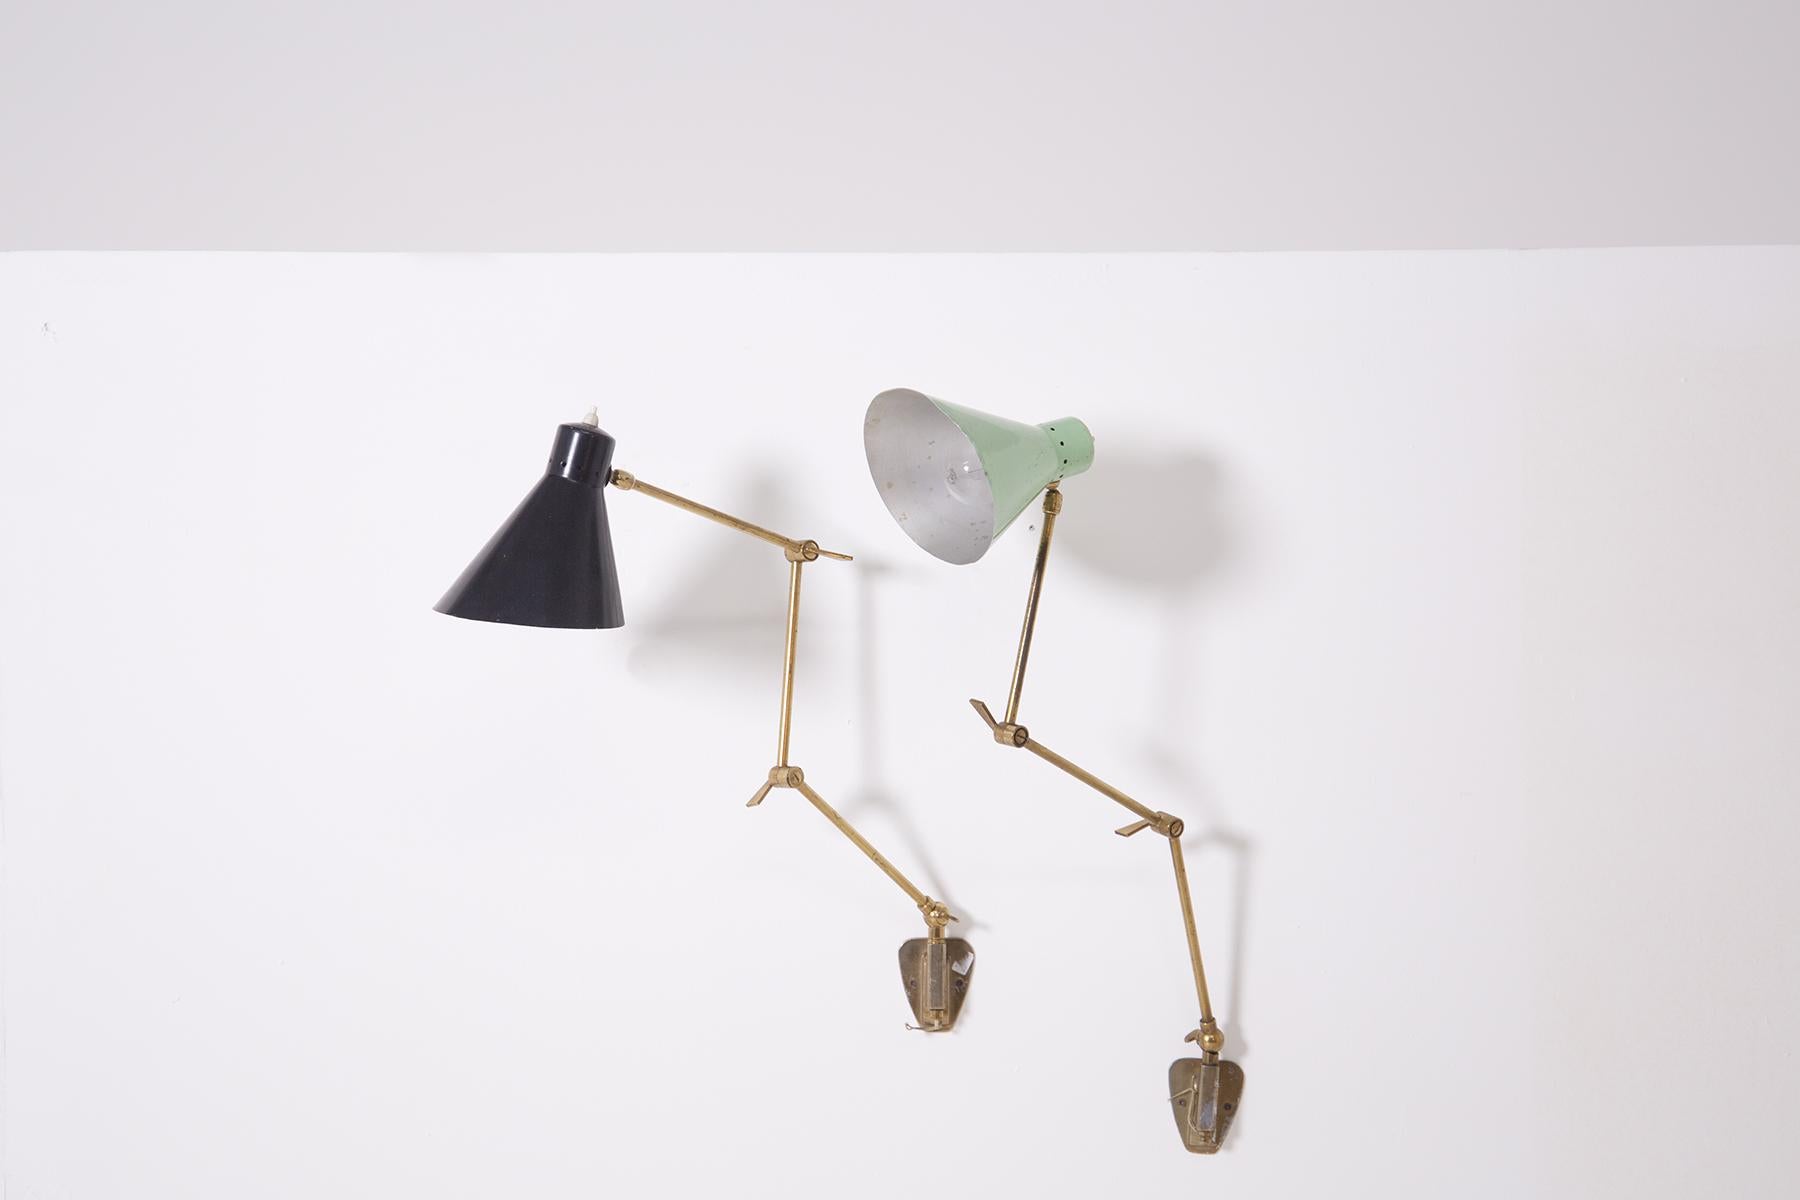 Pair of Stilnovo manufactured wall lamps of the 1950s. The wall lamps are adjustable. The adjustable brass structure allows to shape the lamp in various positions. The lamp holder cap is made of painted aluminium. One lamp is black and the second